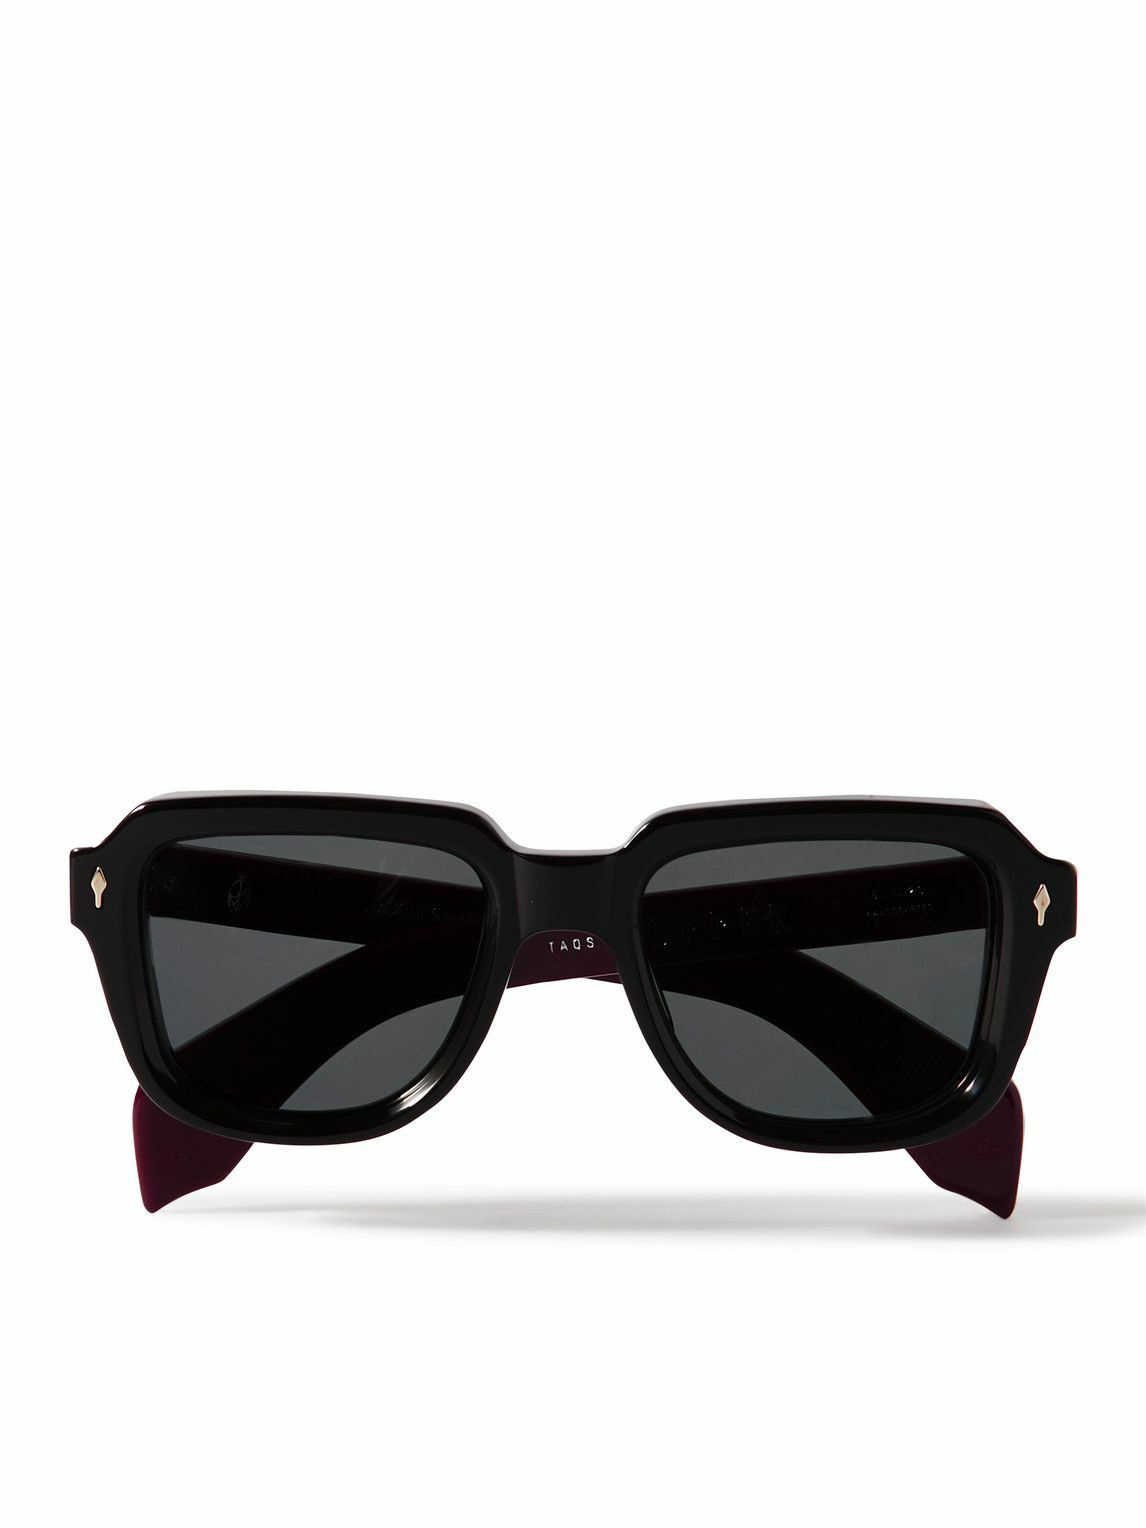 Jacques Marie Mage - Hopper Goods Taos Square-Frame Acetate and Silver ...